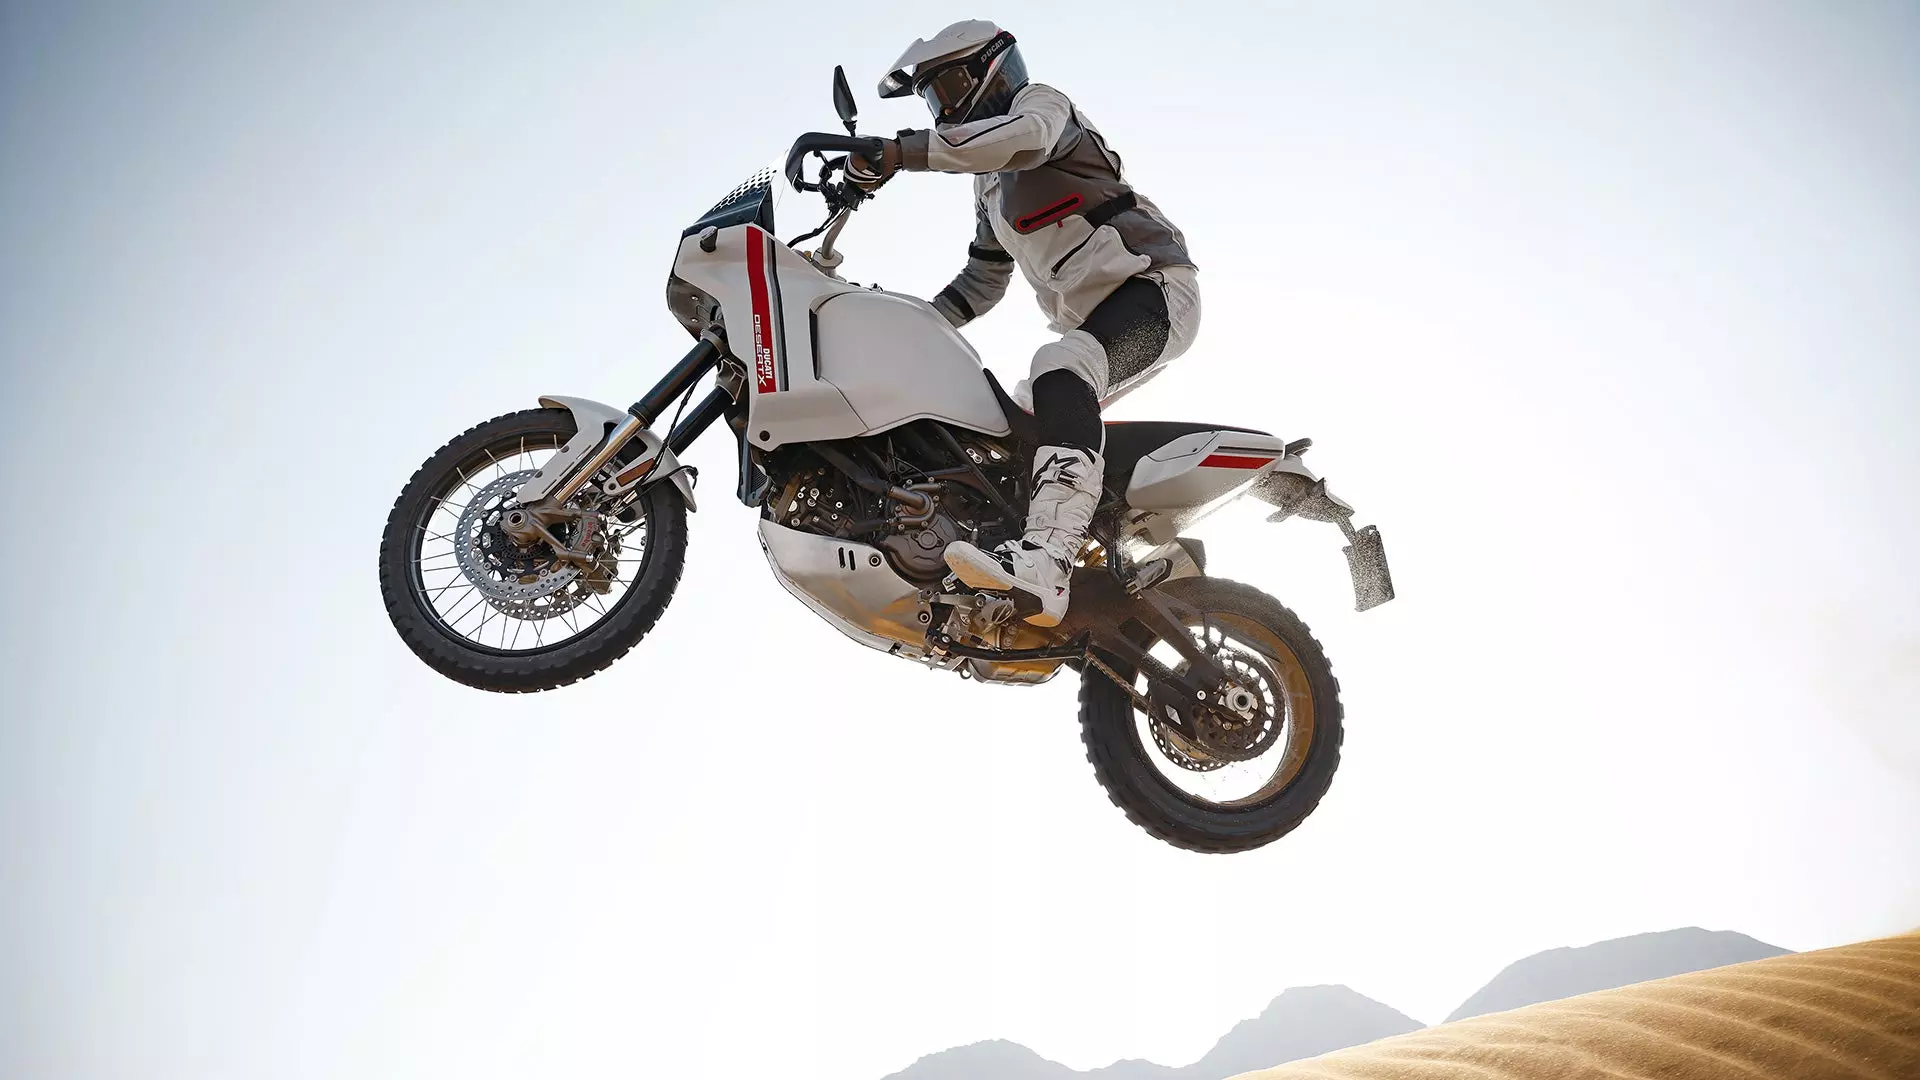 The Ducati DesertX Is a Stylish Adventure Bike Ready for Dirt and Sand